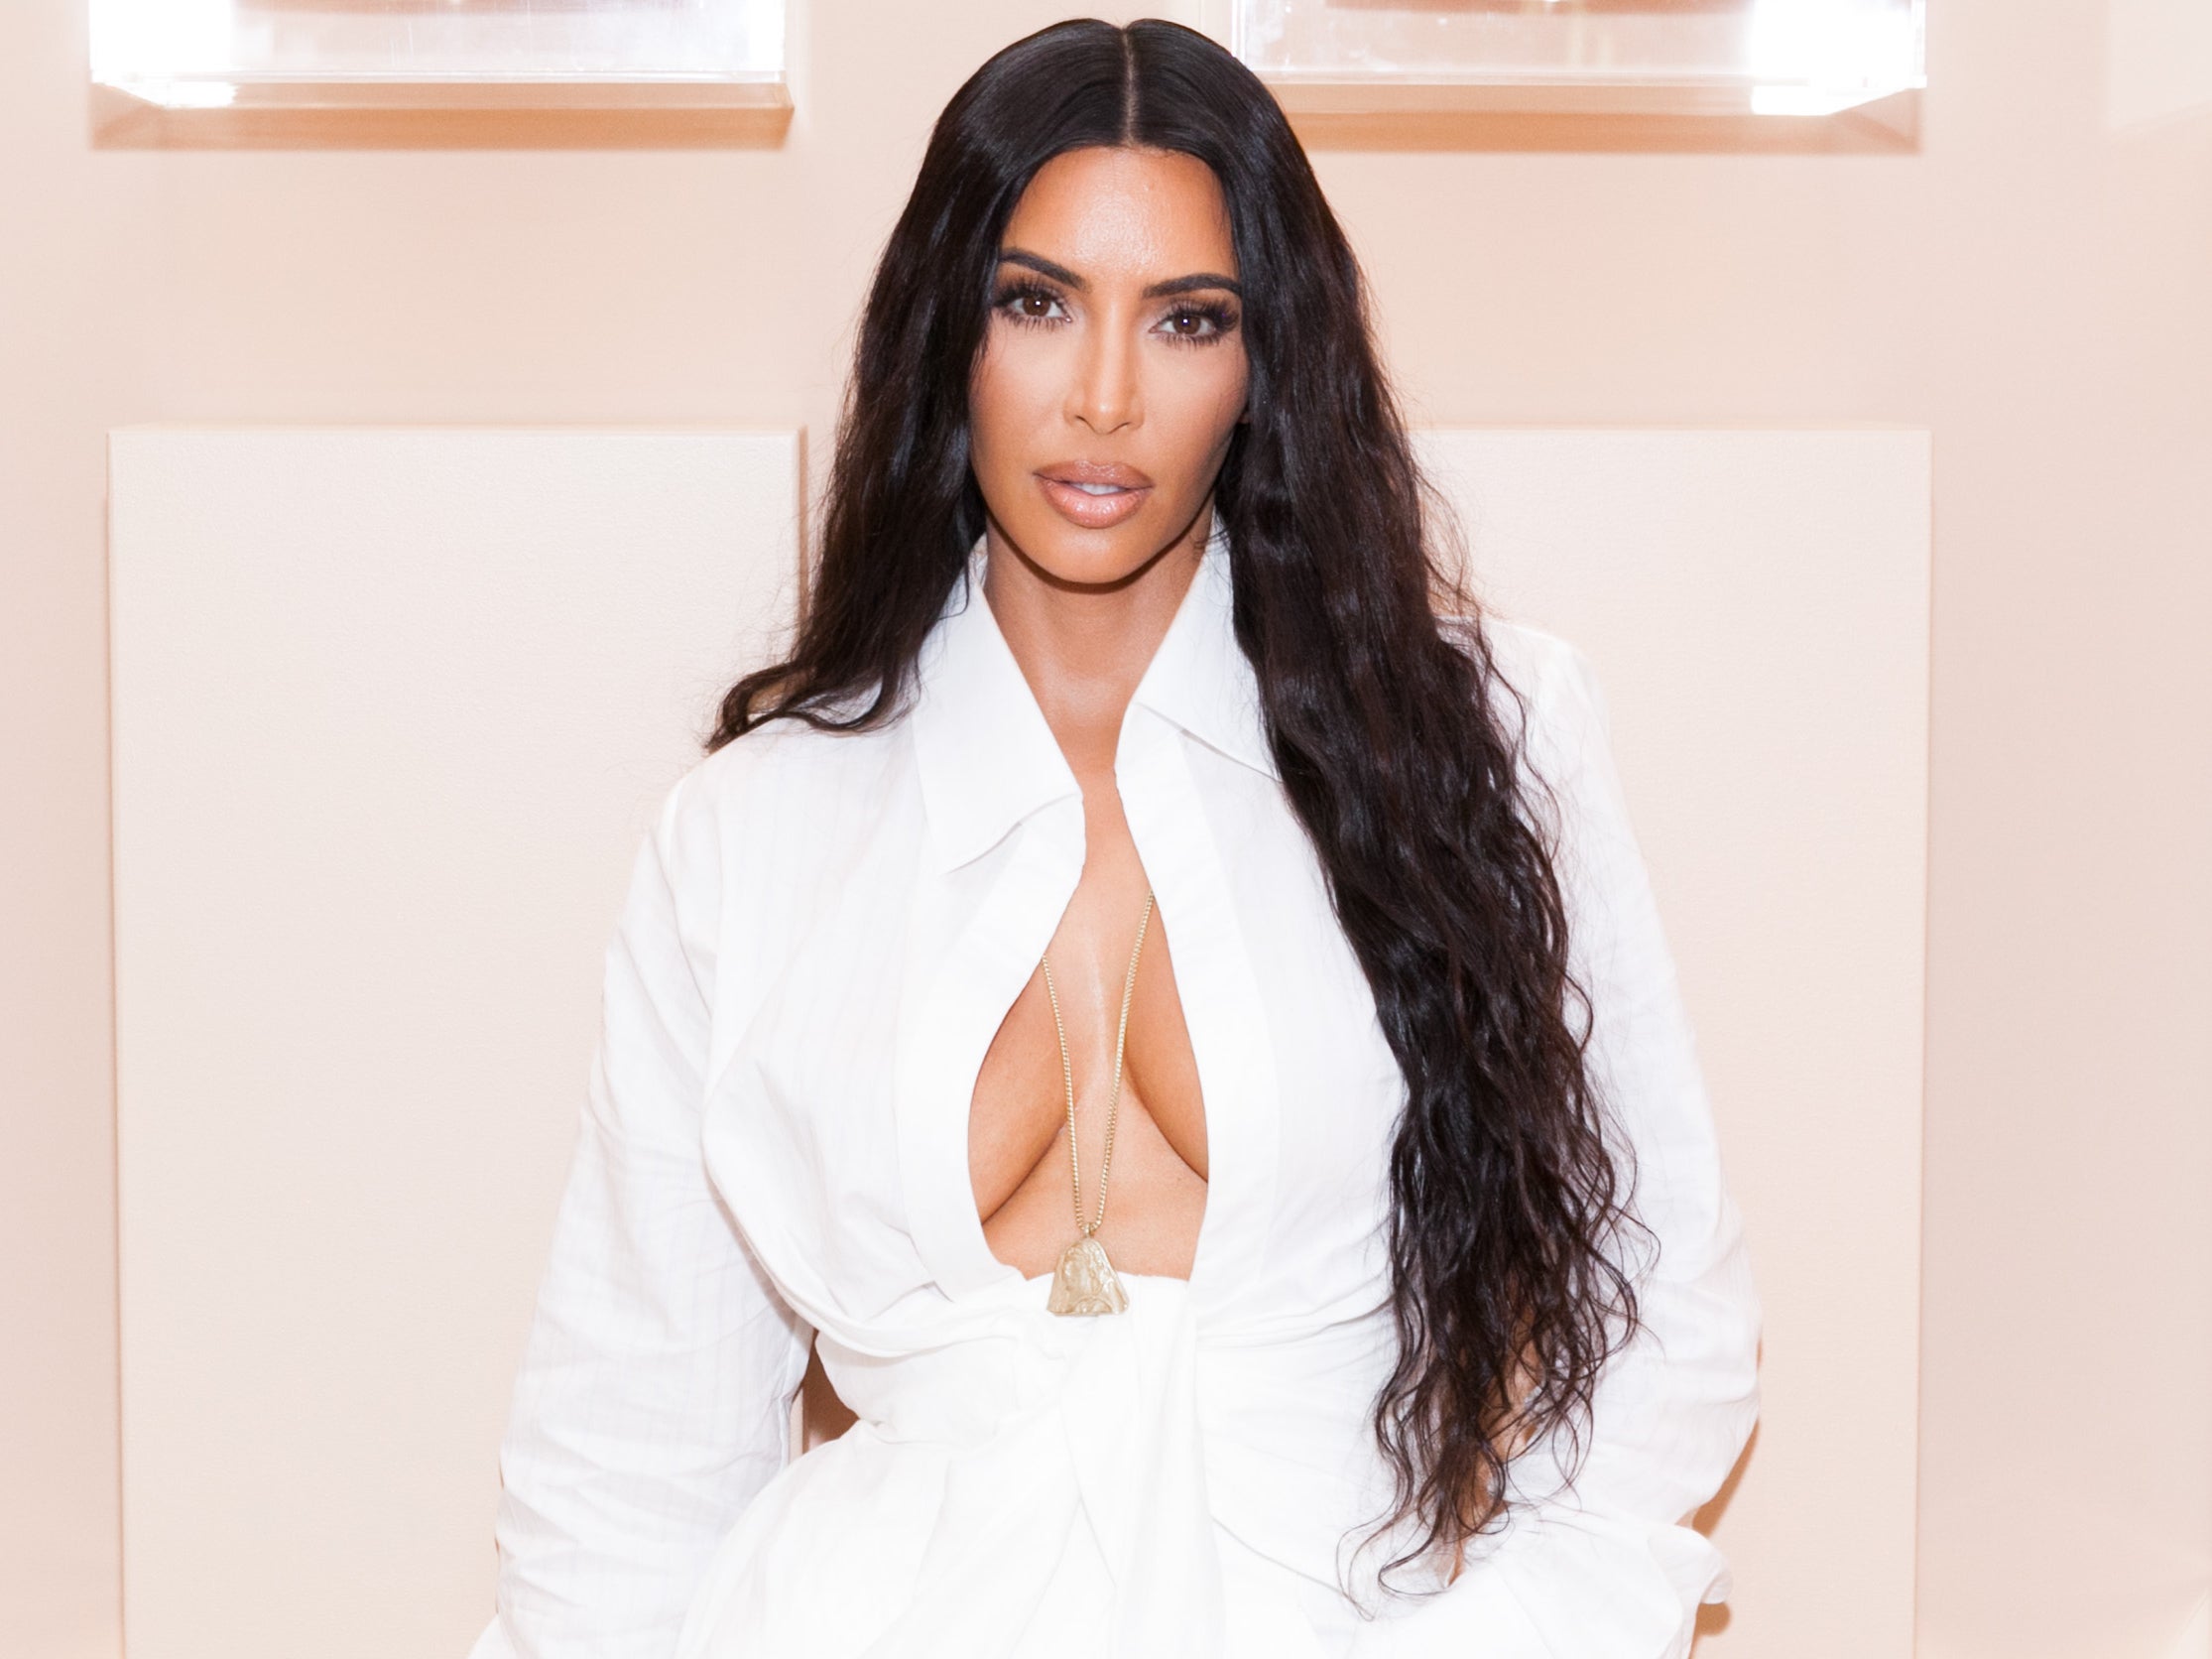 Kim Kardashian Sparks Viral Meme Following Tone Deaf 40th Birthday Party On Private Island The Independent